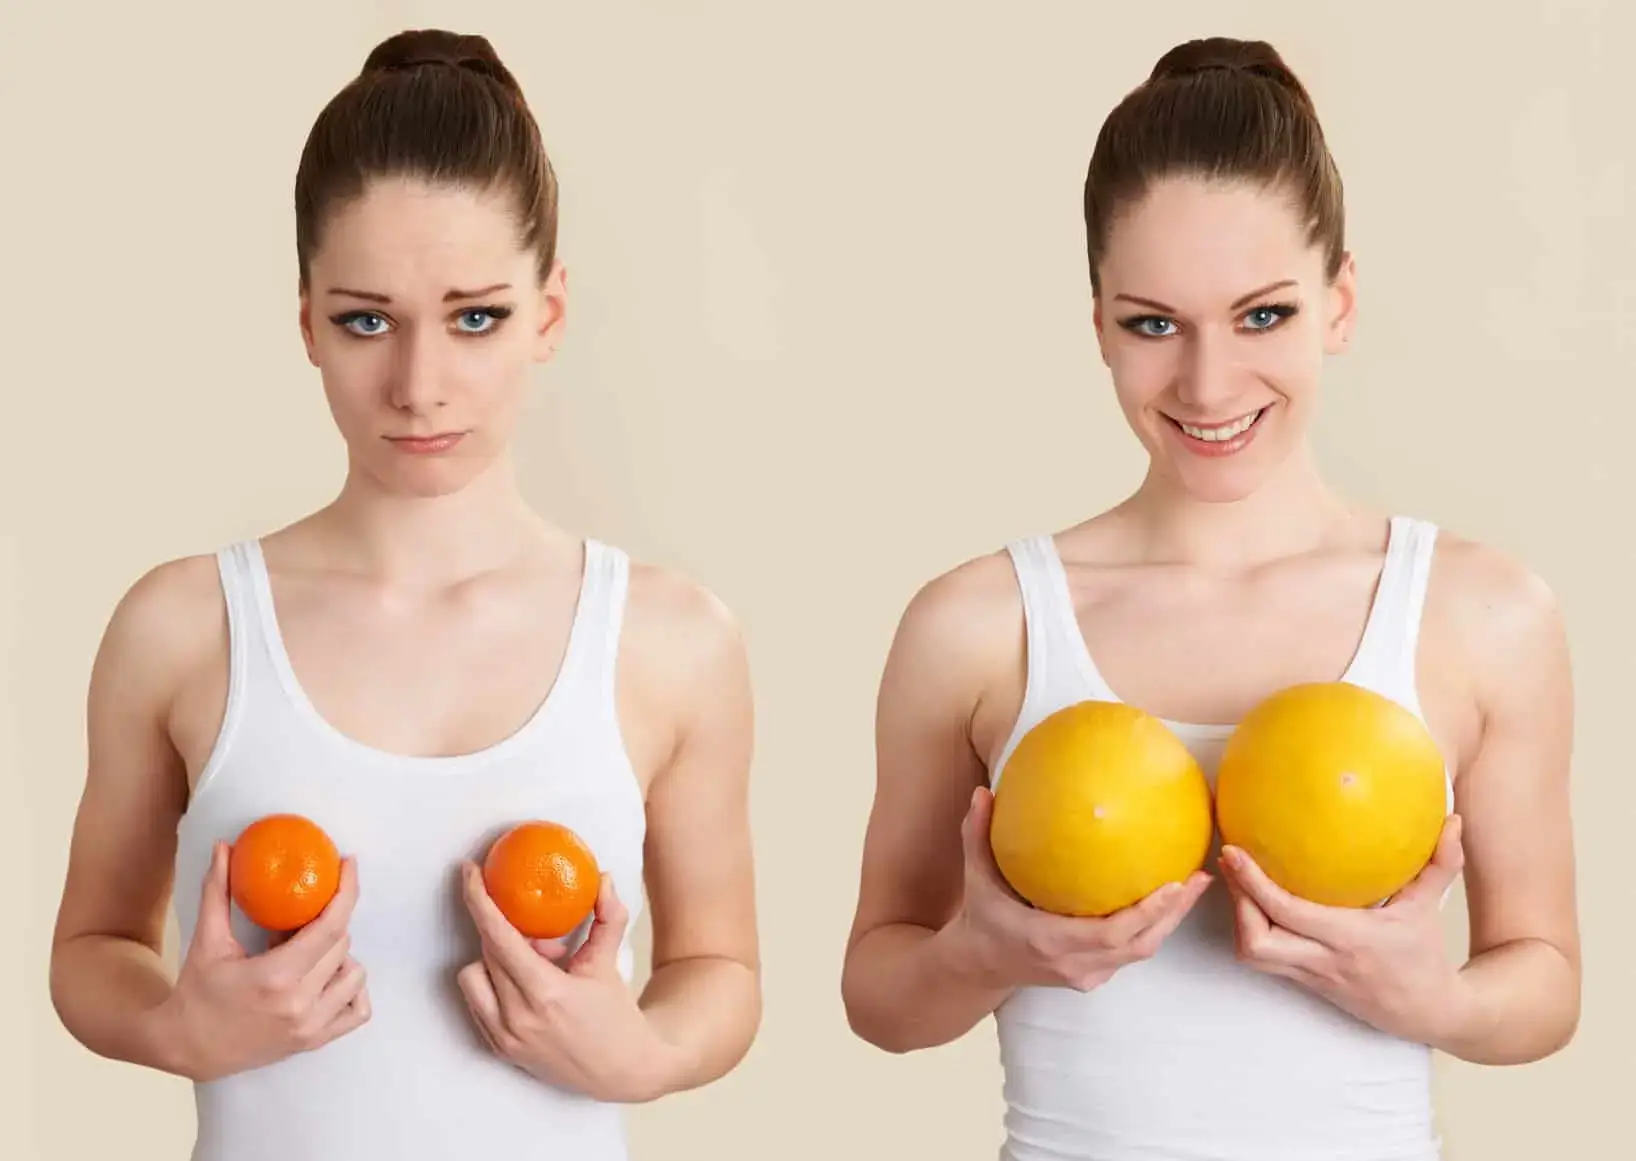 The Fastest Way to Recover From Breast Augmentation: From Diet and